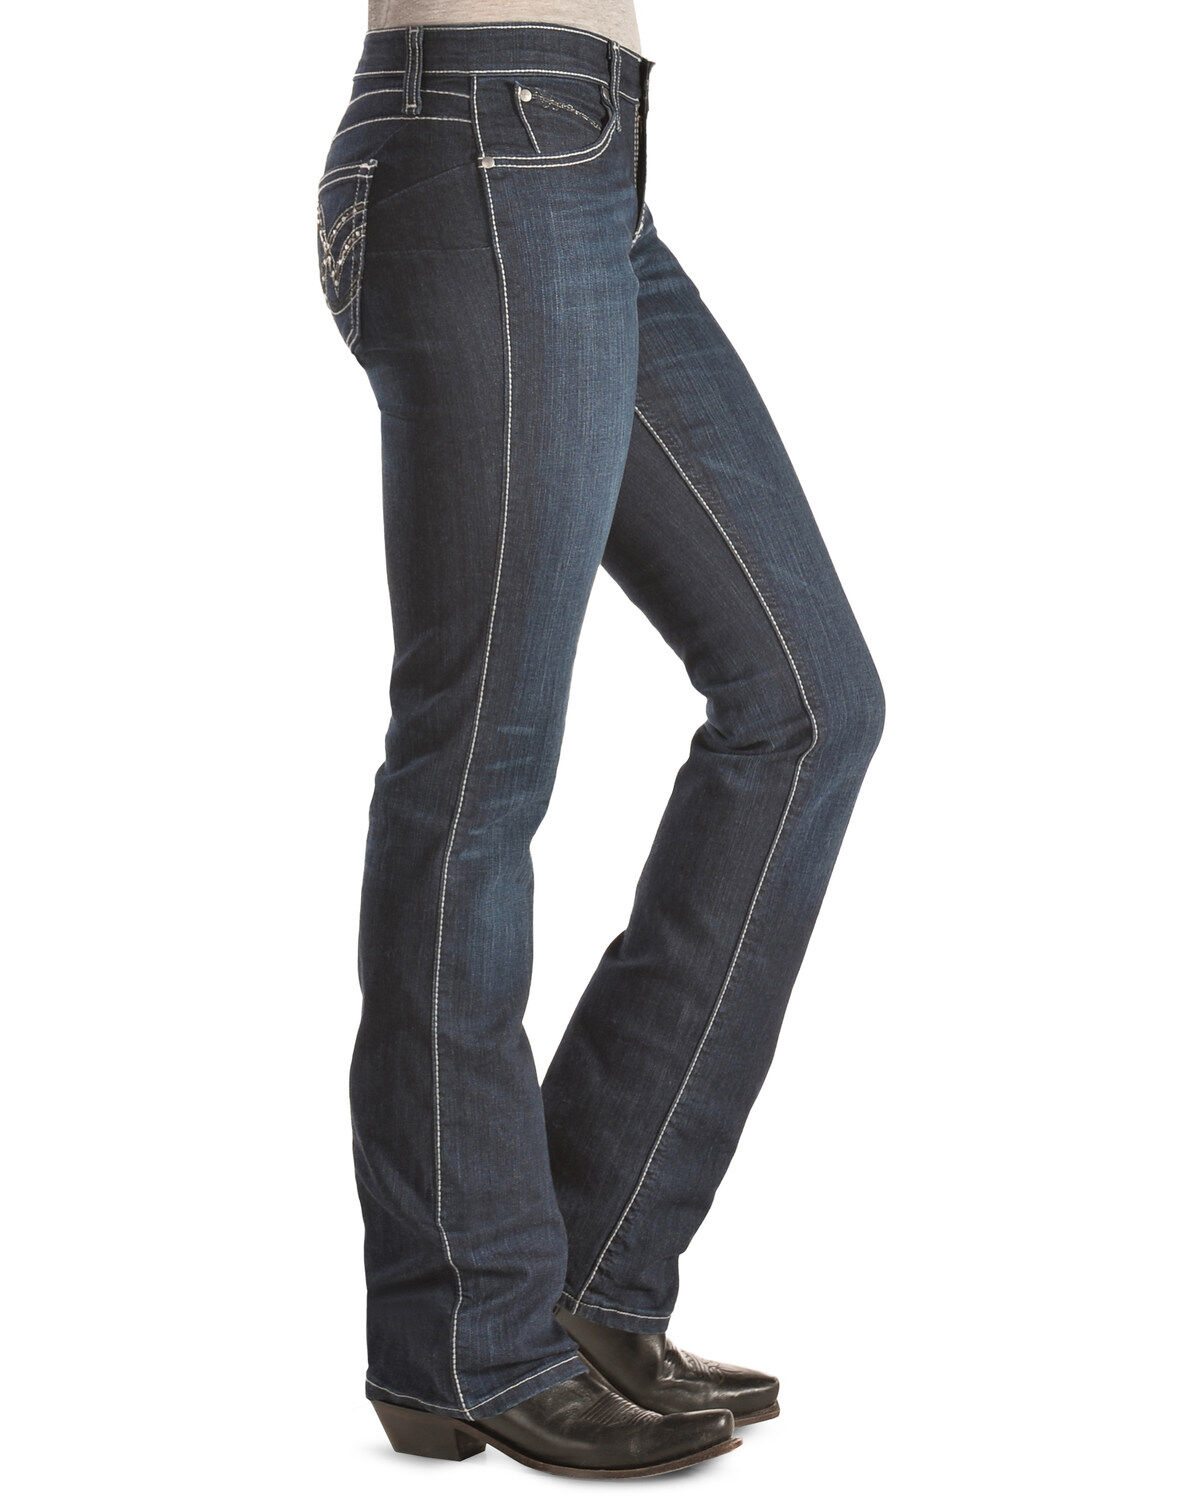 Wrangler Women's Cowgirl Cut Booty Up 